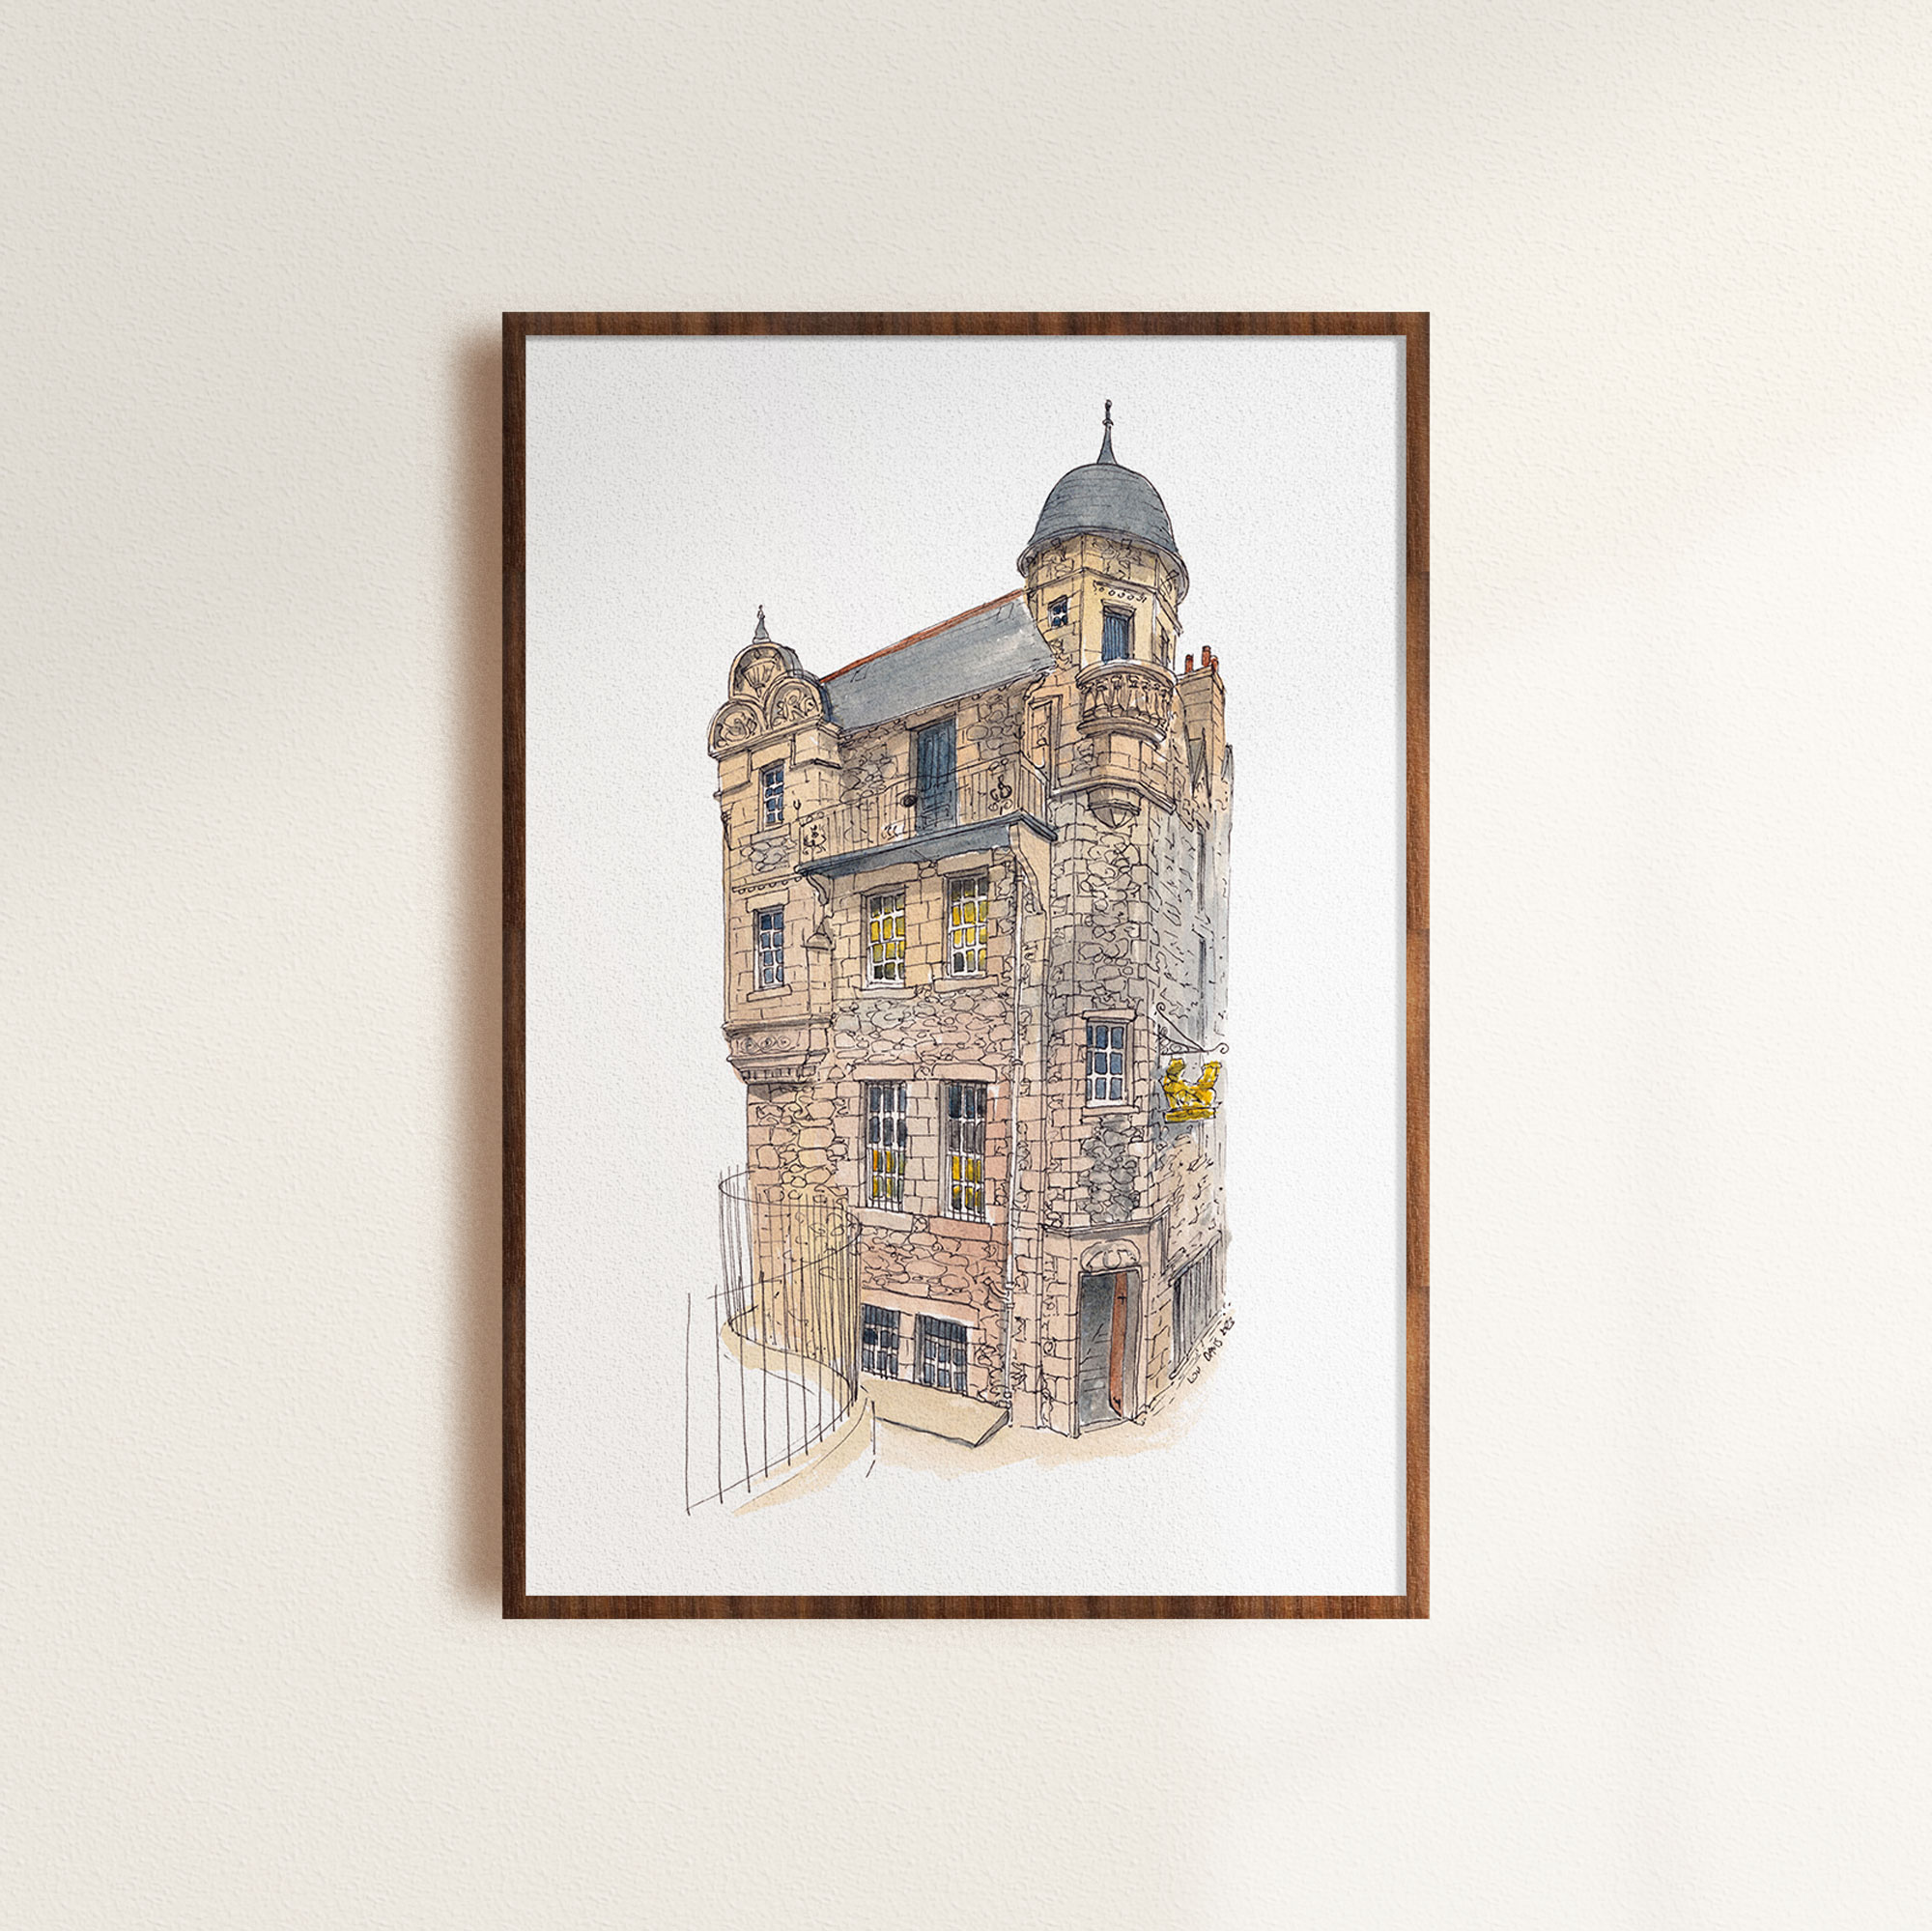 A mockup of a framed painting of the Writer's Museum Edinburgh